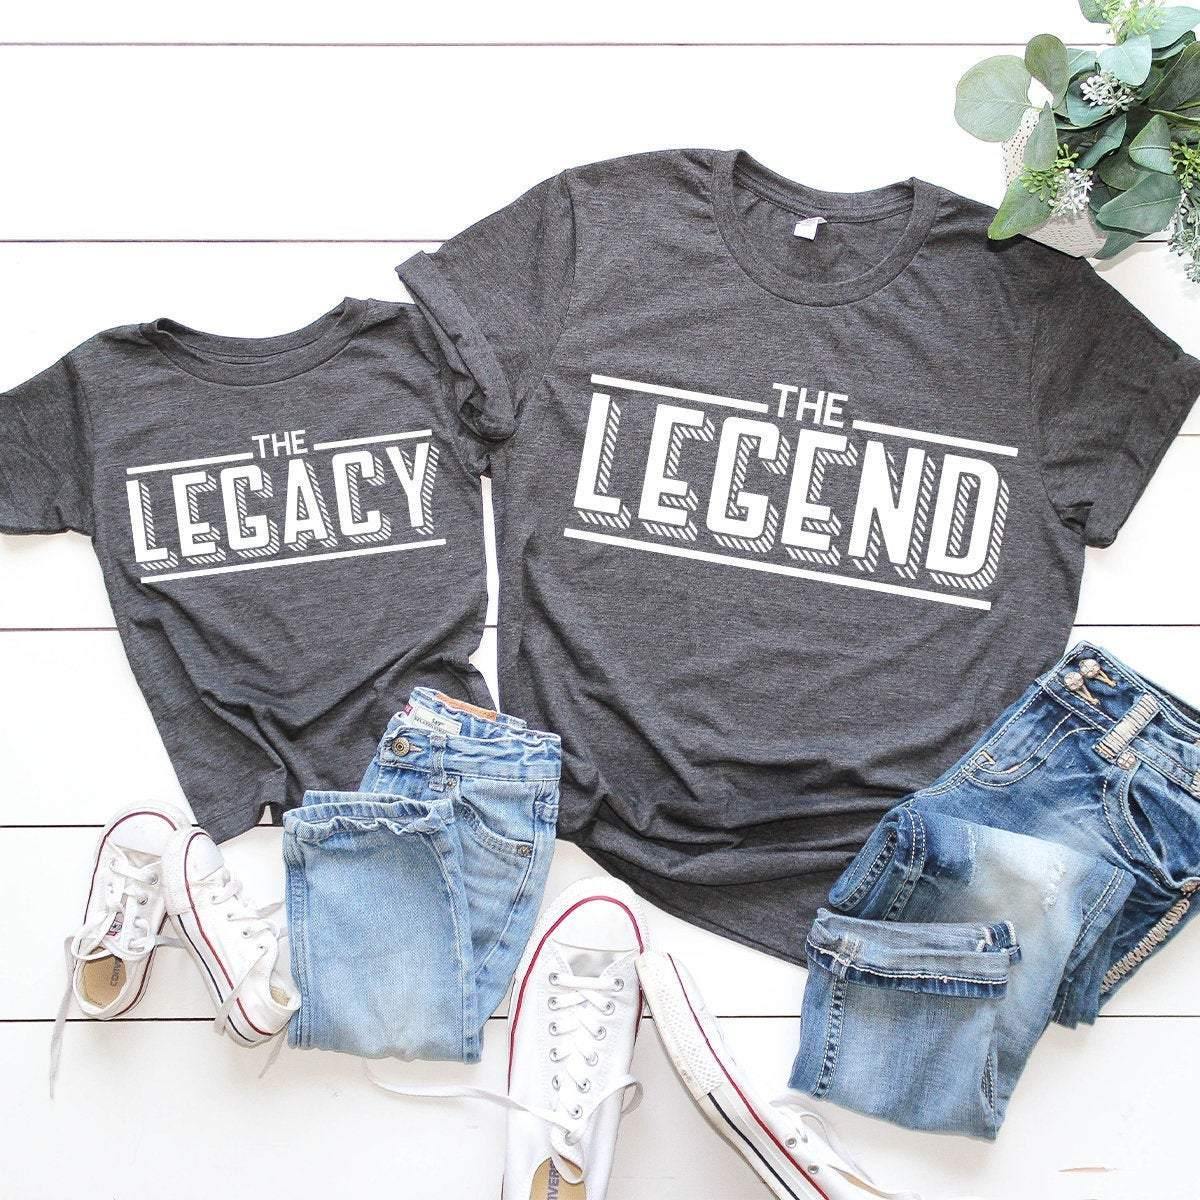 Dad The Legend, Dad Gift, Gift for Dad, Fathers Day Shirt, Fathers Day Gift, Dad Gift, Dad Birthday Gift, Best Dad Shirt, Daddy Shirt